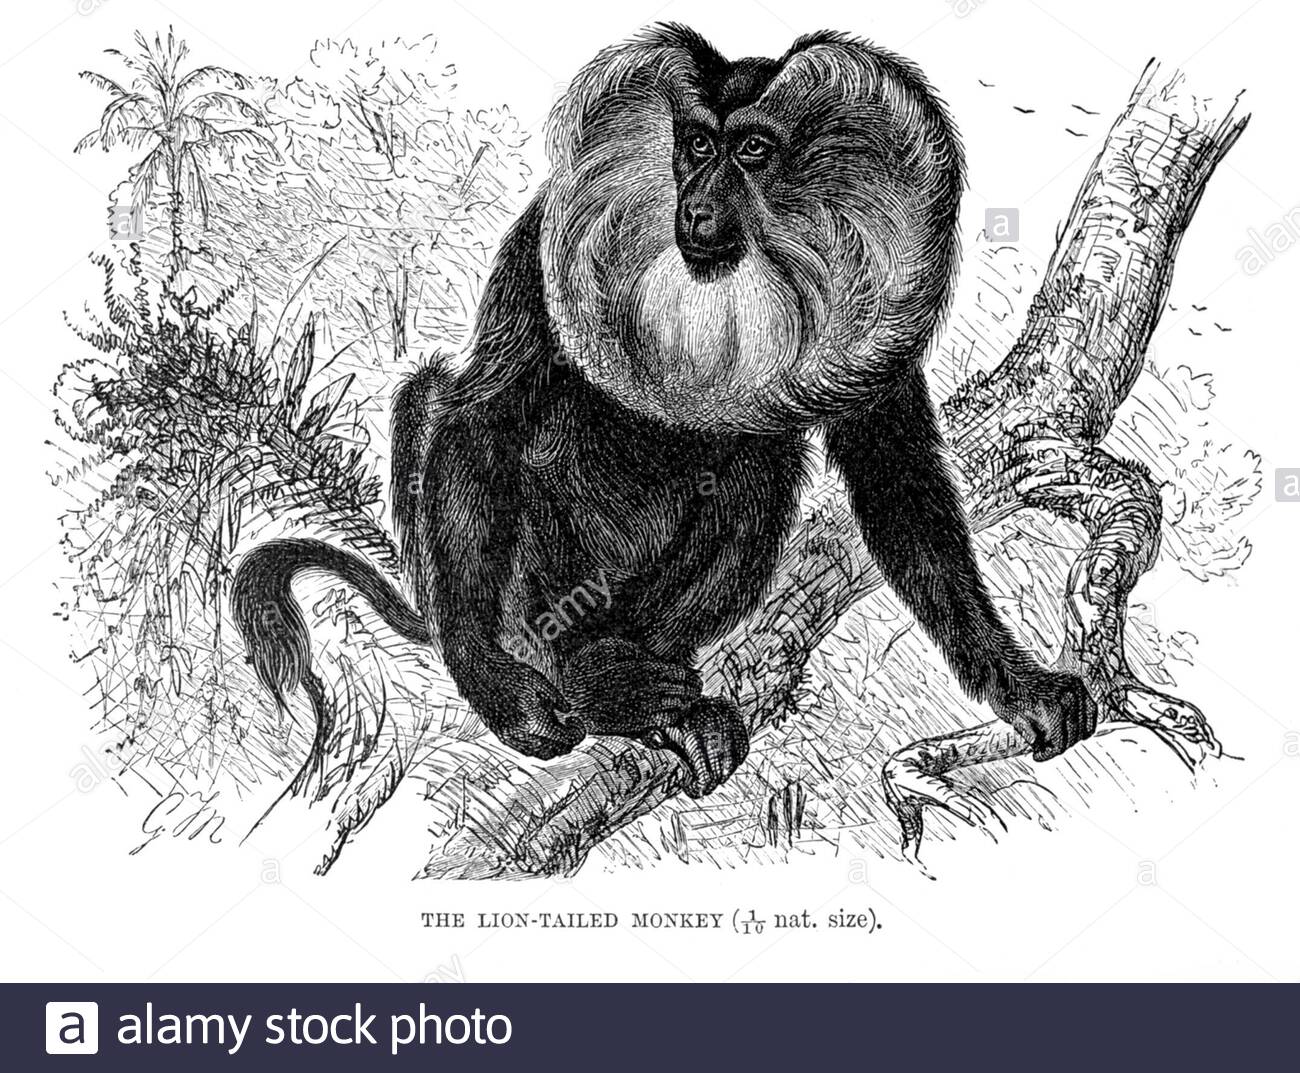 Lion Tailed Monkey (lion-tailed macaque), vintage illustration from 1893 Stock Photo